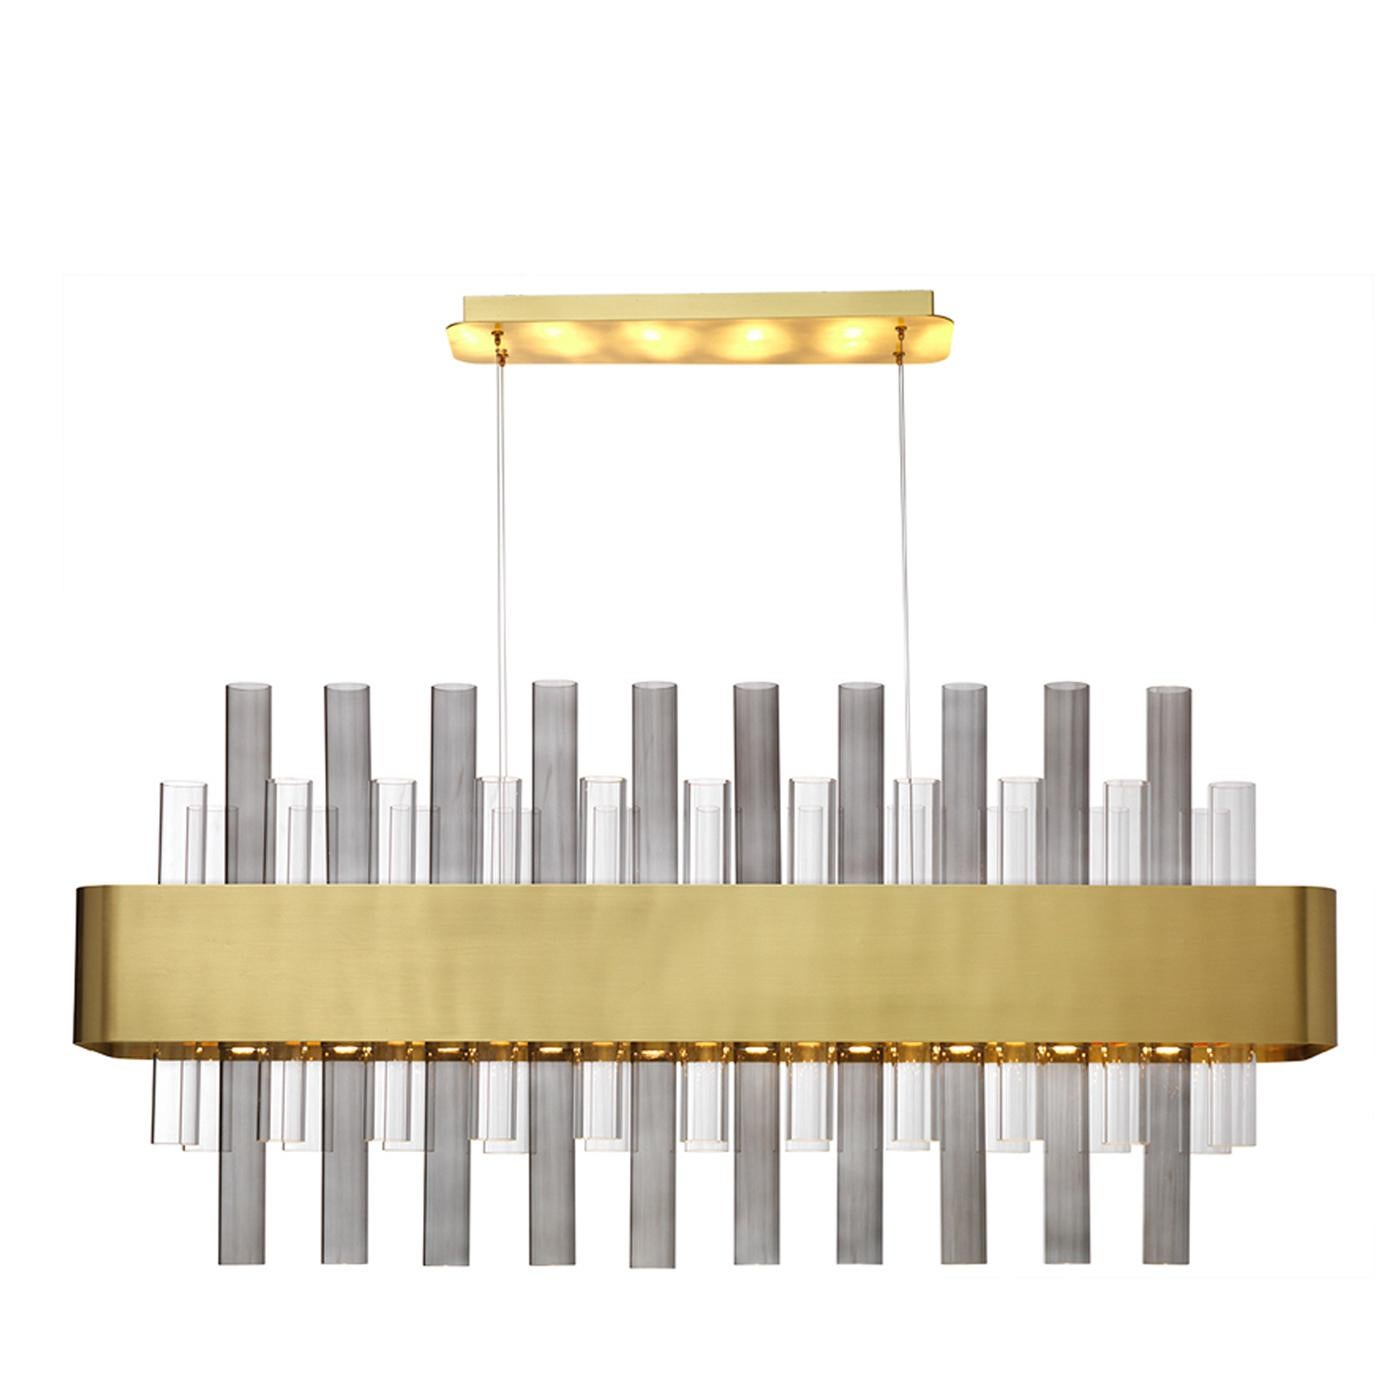 Create a chic atmosphere in a contemporary dining space with the tab chandelier. Drawing inspiration from different eras and styles, the chandelier features a brass body with a satin finish that envelops transparent and smoky crystal elements. The